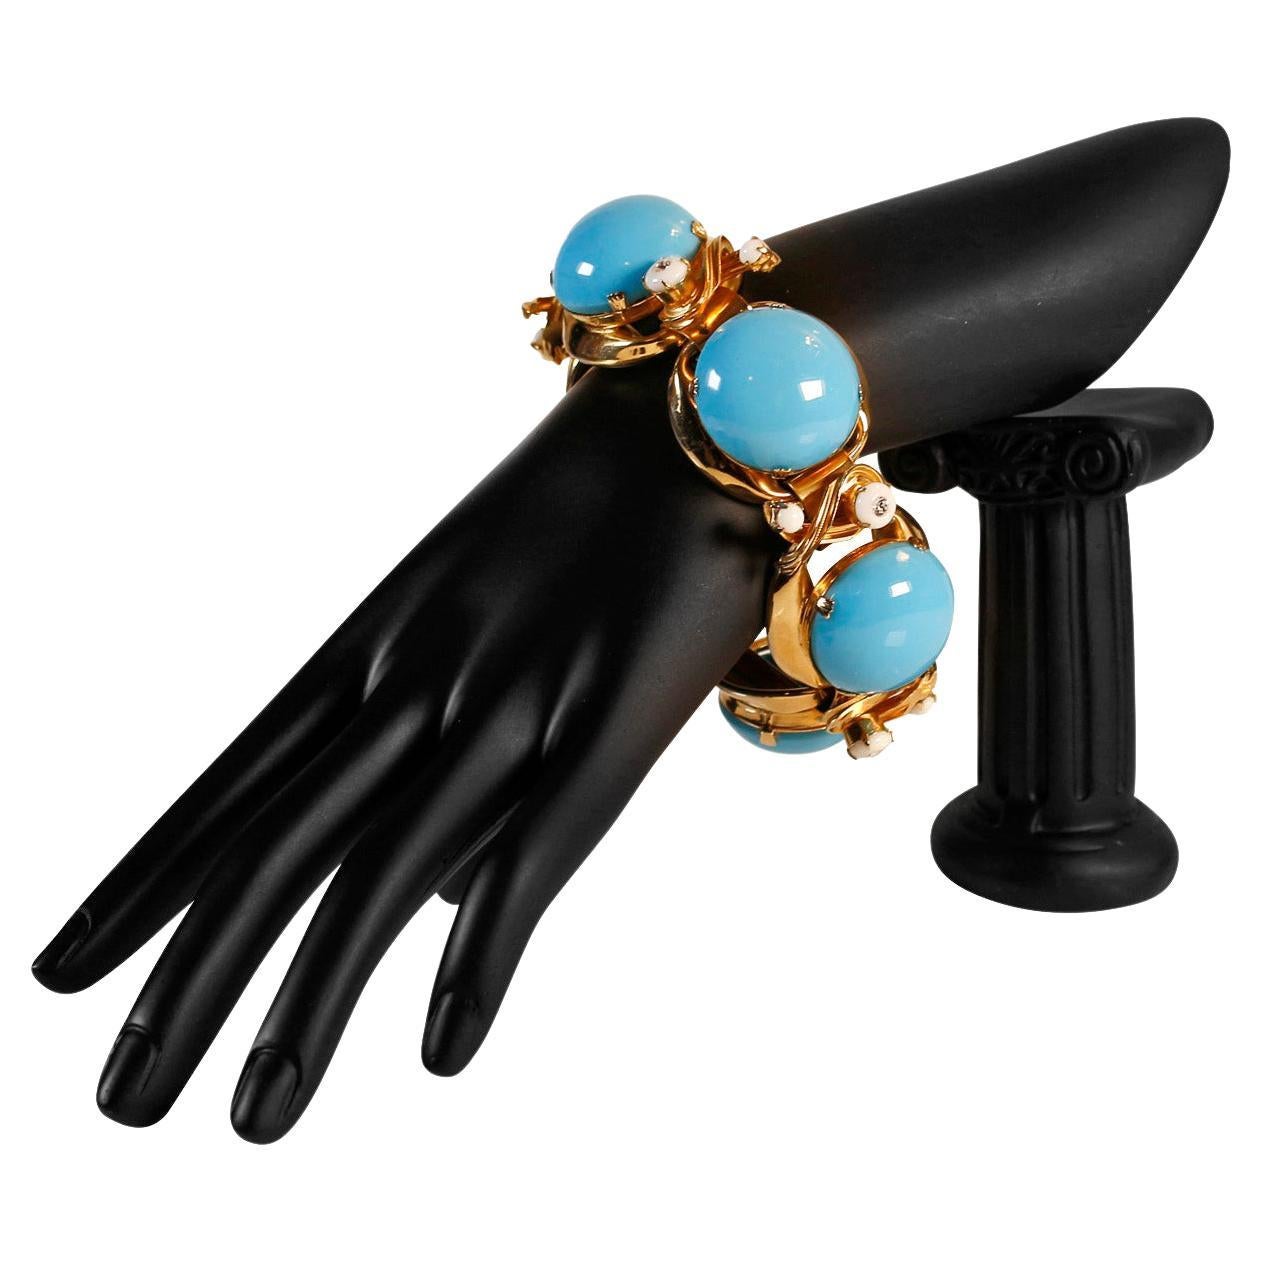 Vintage Unsigned Gold and Faux Turquoise Bracelet Circa 1960s For Sale 1